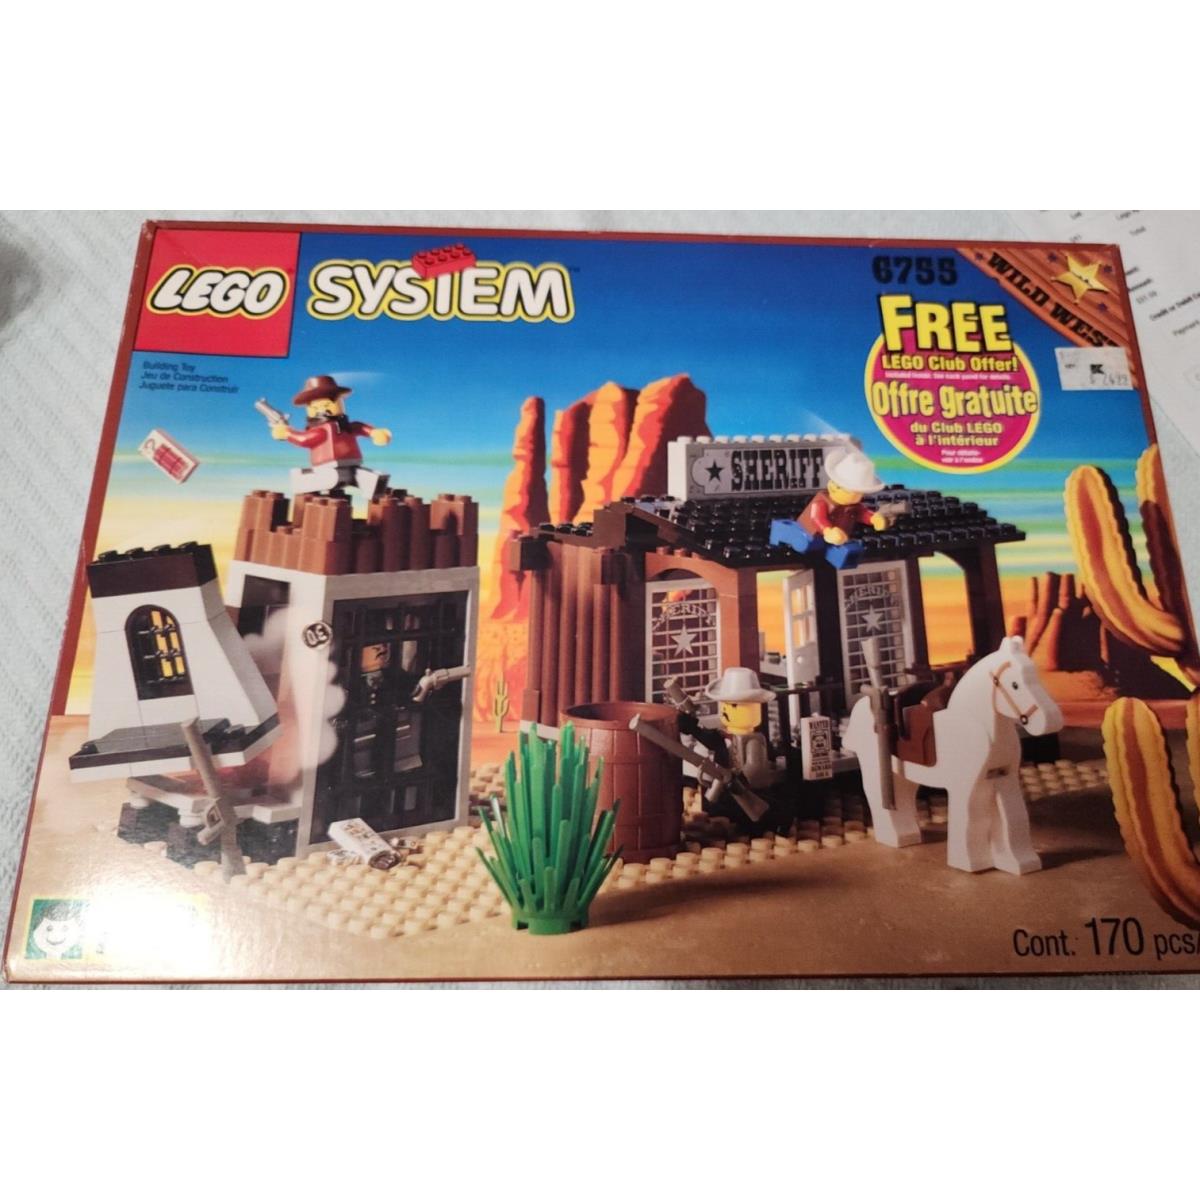 Lego Western: Sheriff`s Lock-up 6755 Retired Box IS IN Condition